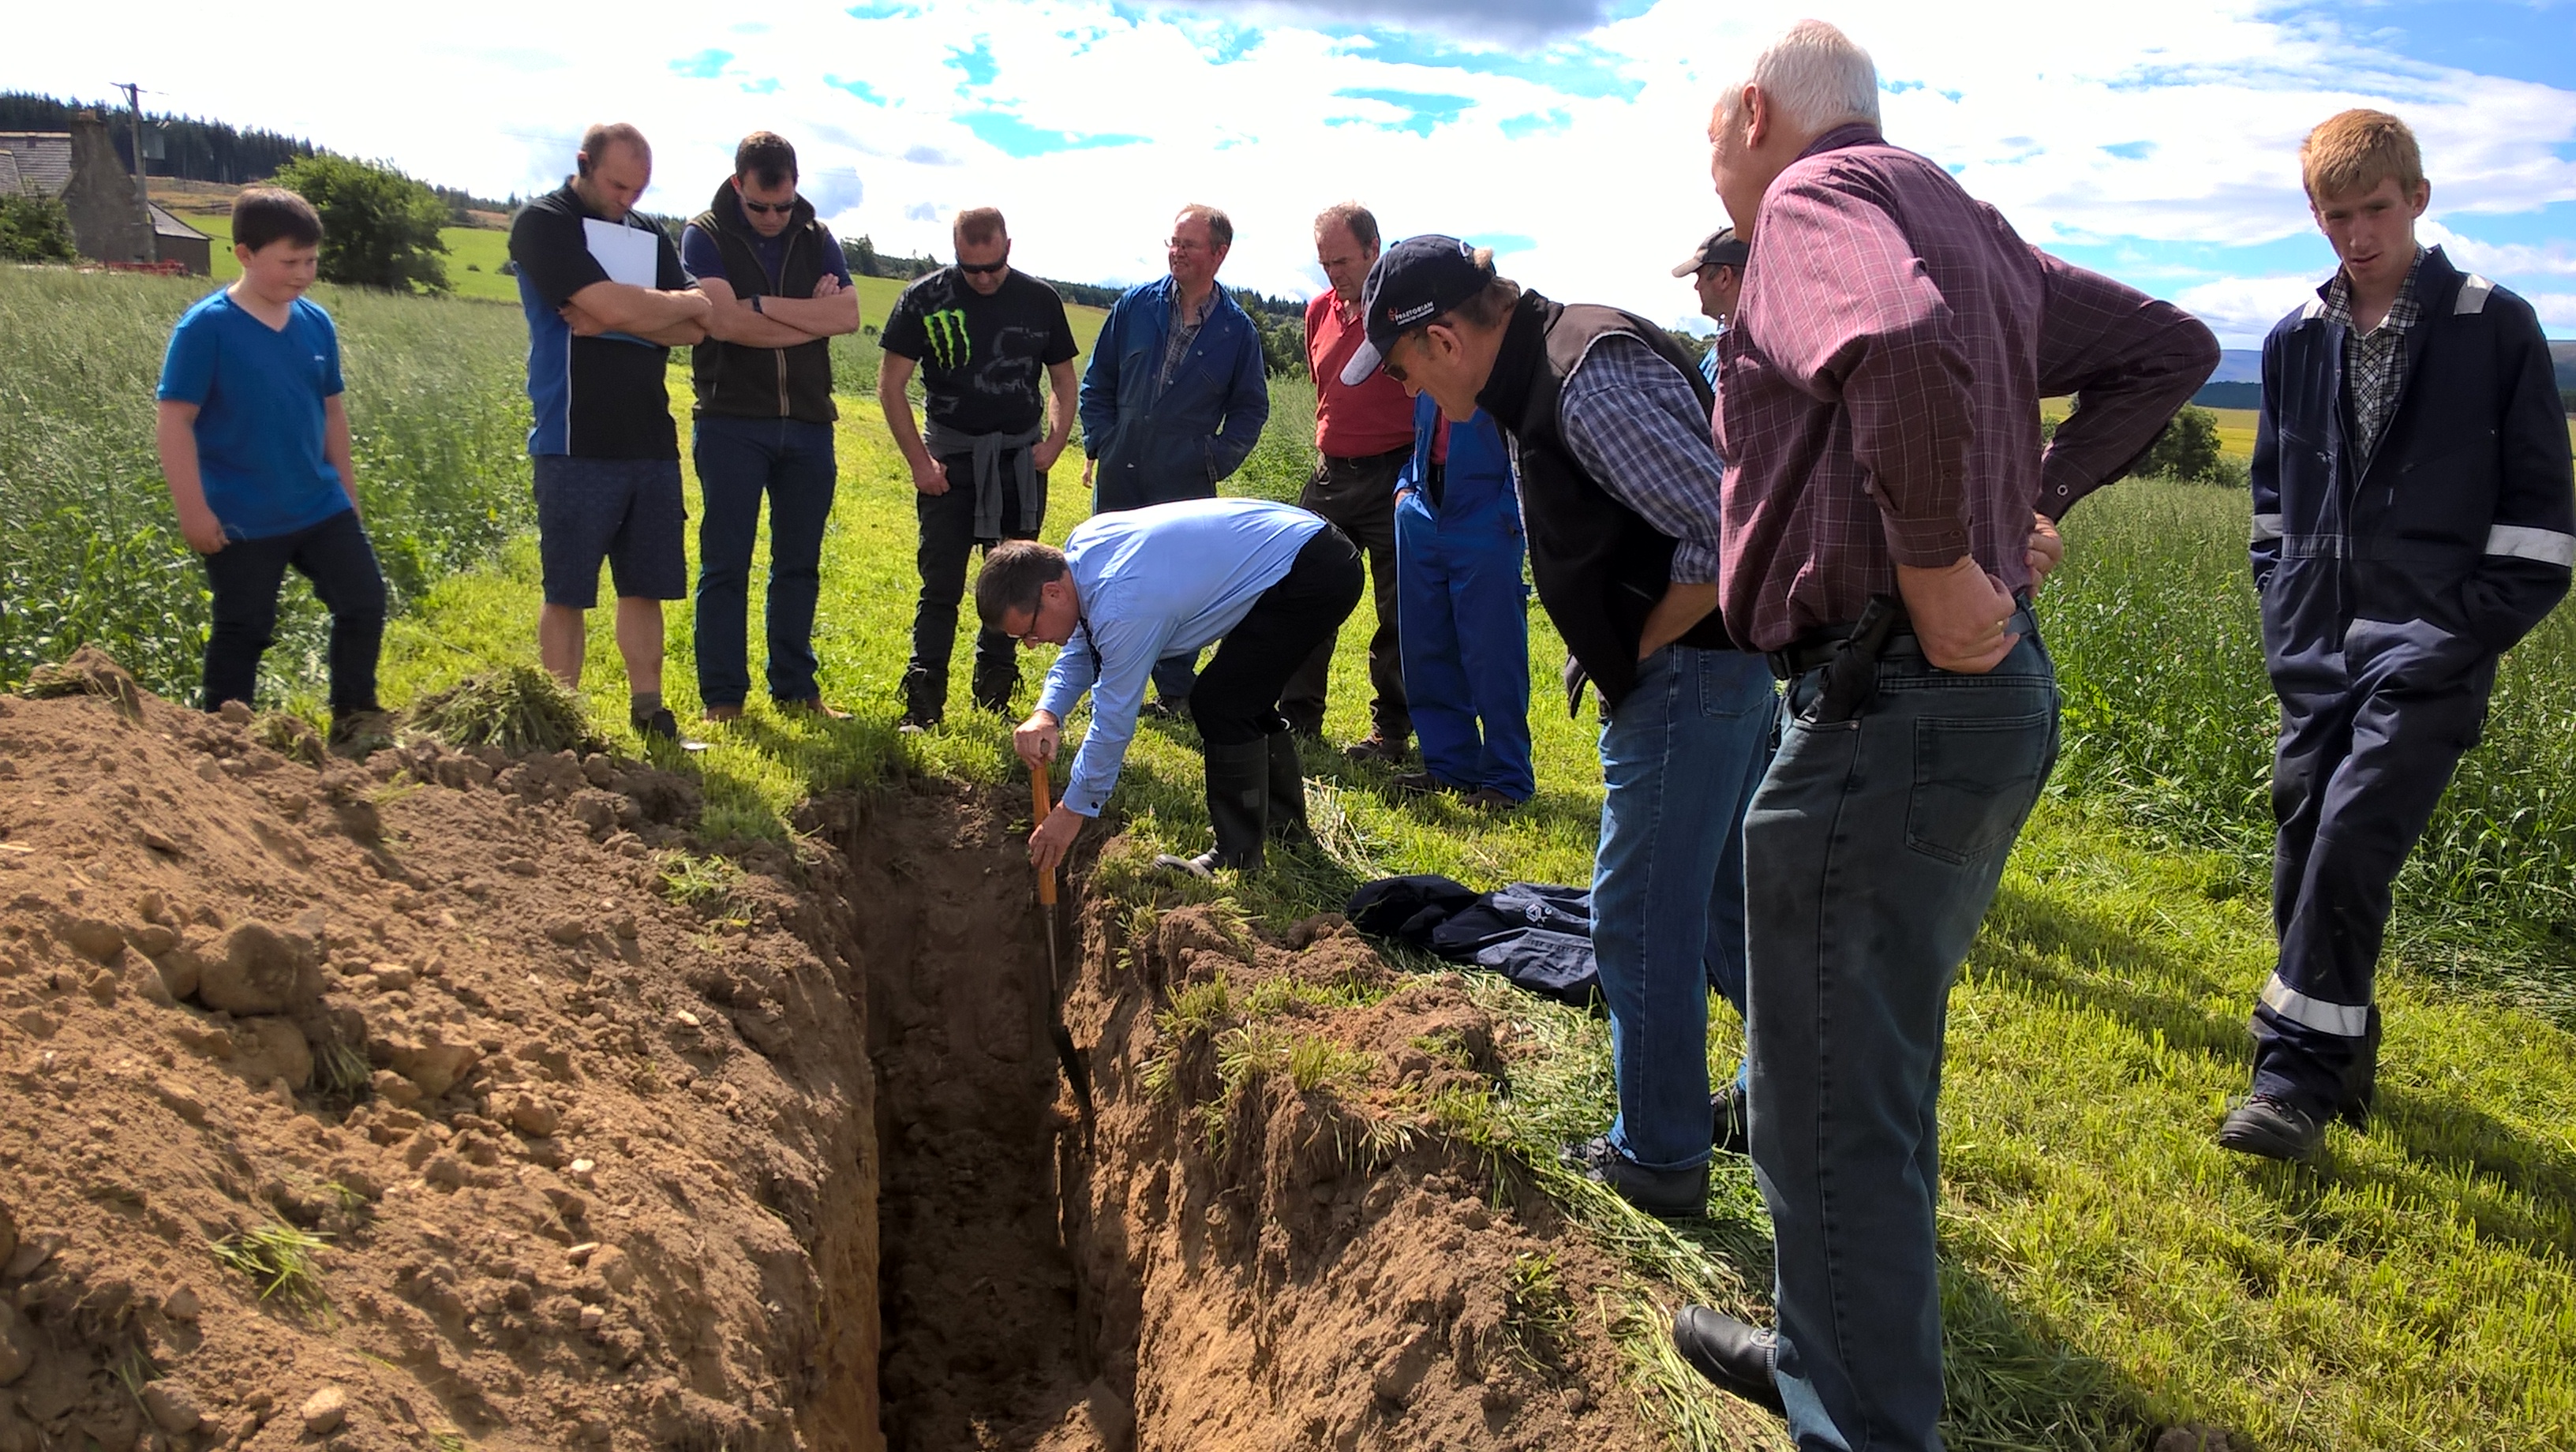 Gavin Elrick with a group of farmers examining a soil pit at the Moray SNN meeting